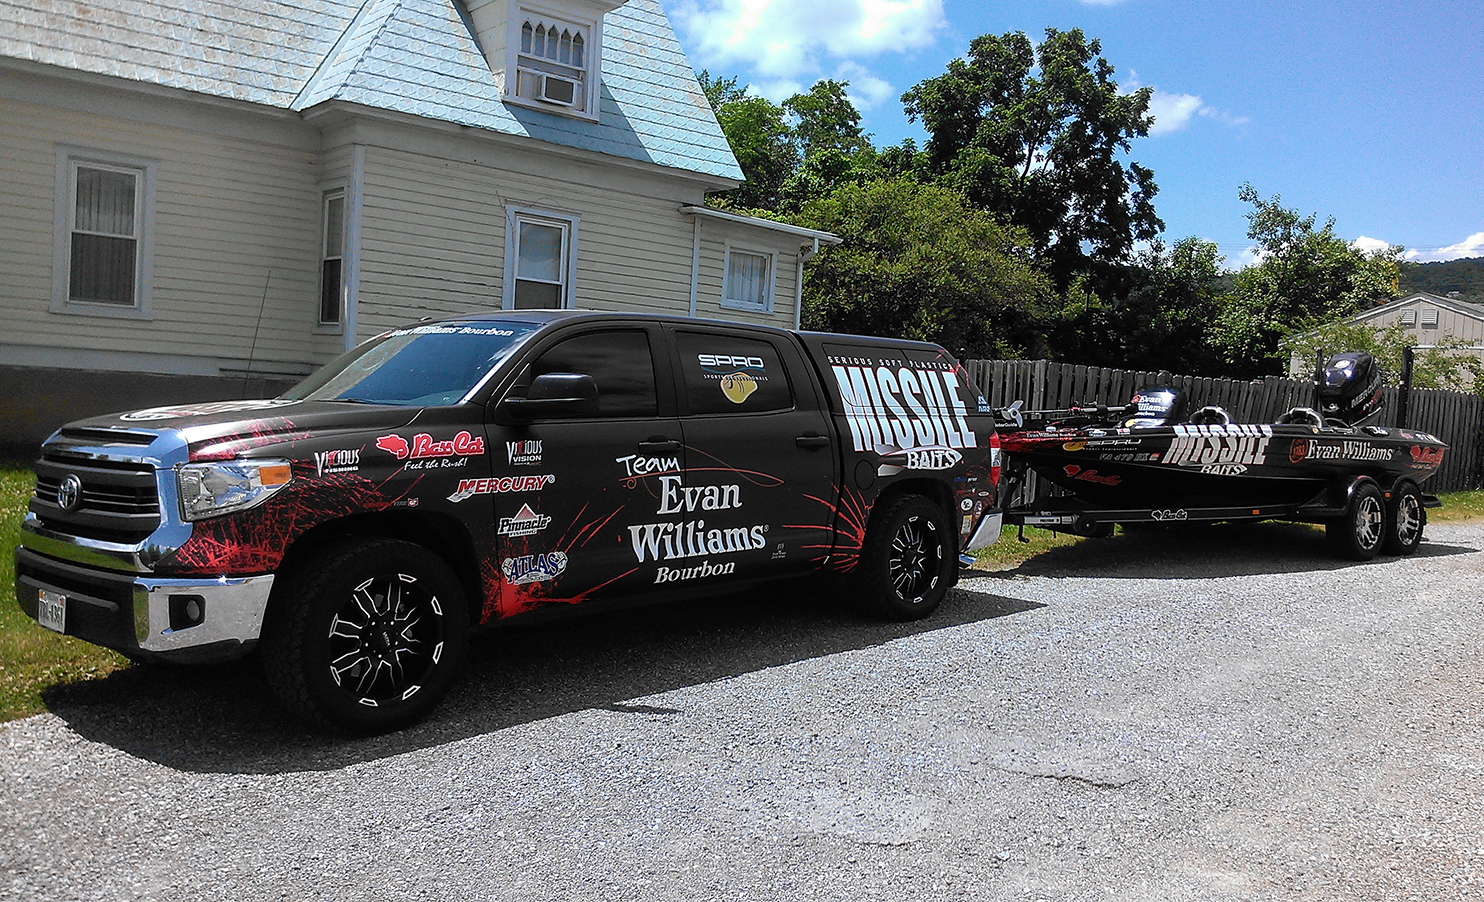 Missile Baits Truck & Boat Wrap